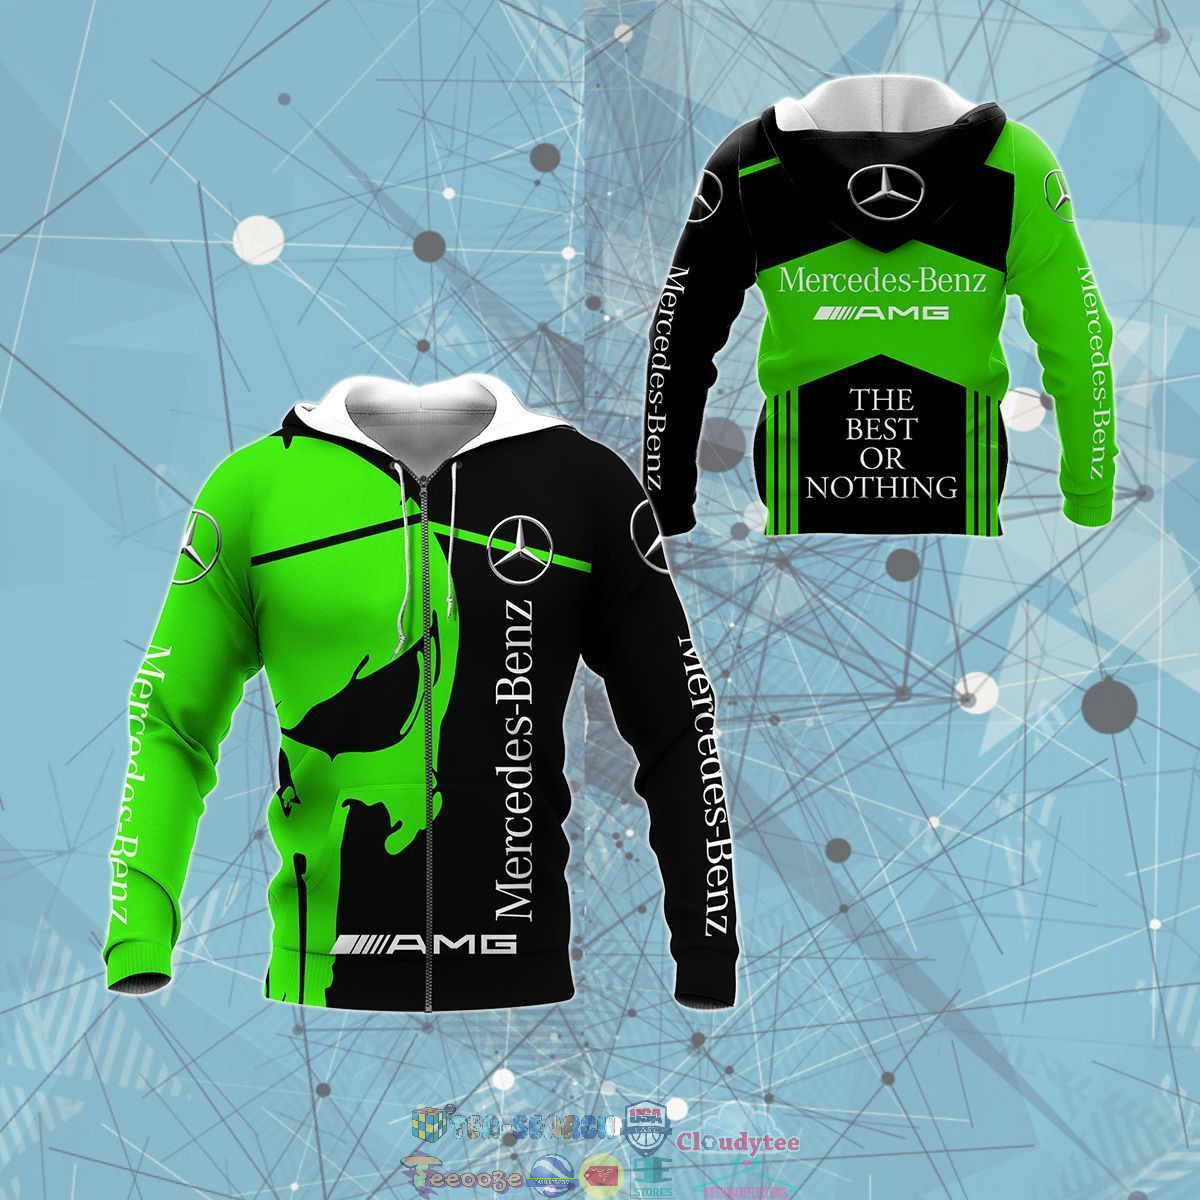 Mercedes AMG Skull ver 3 3D hoodie and t-shirt